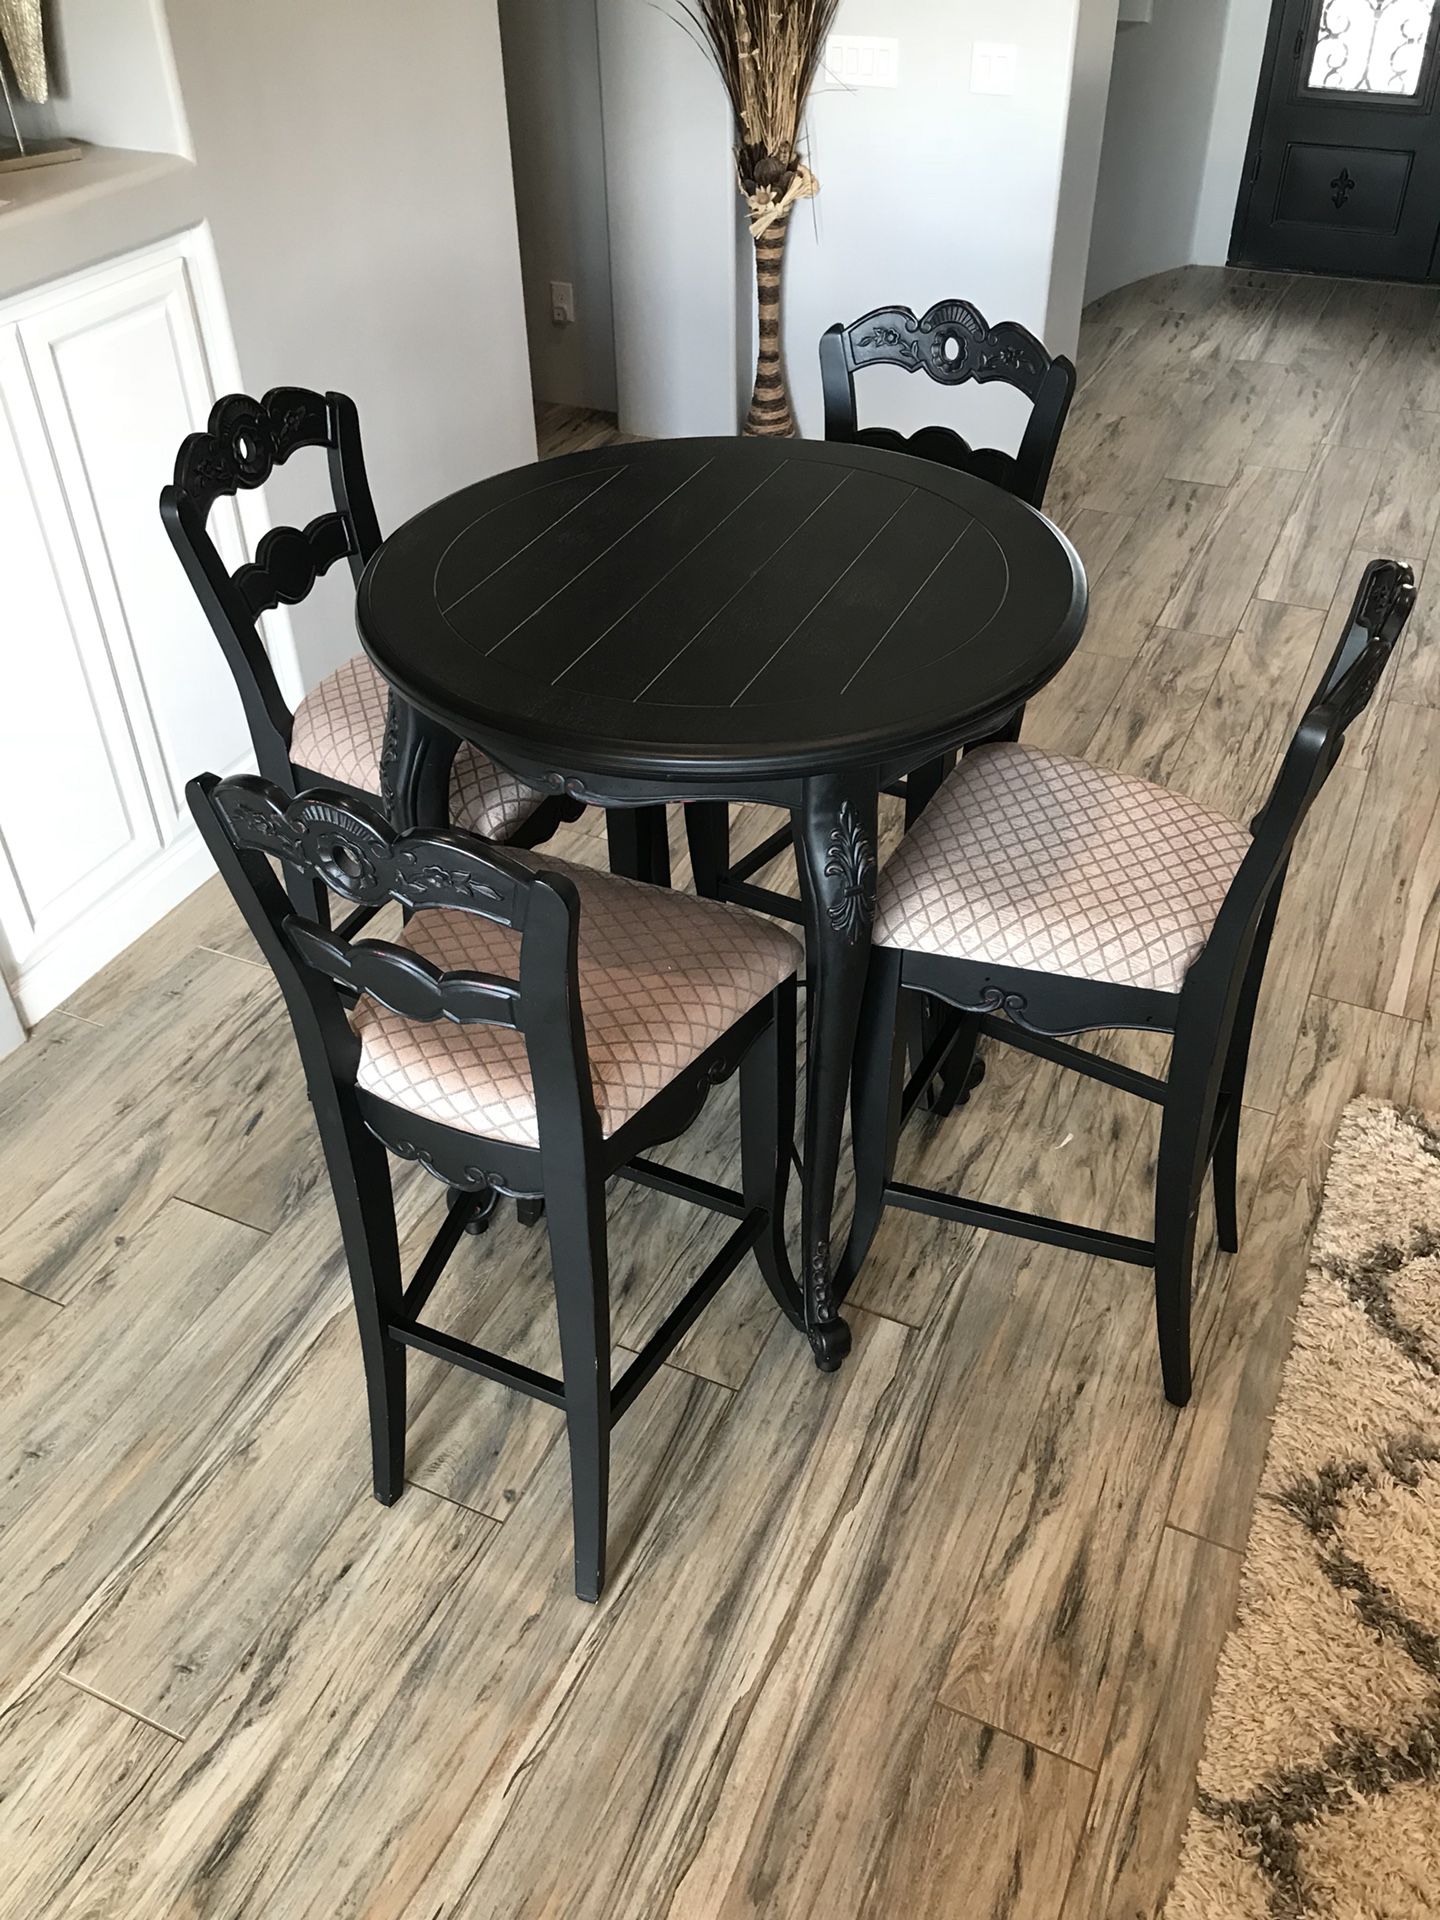 Black high top dining table